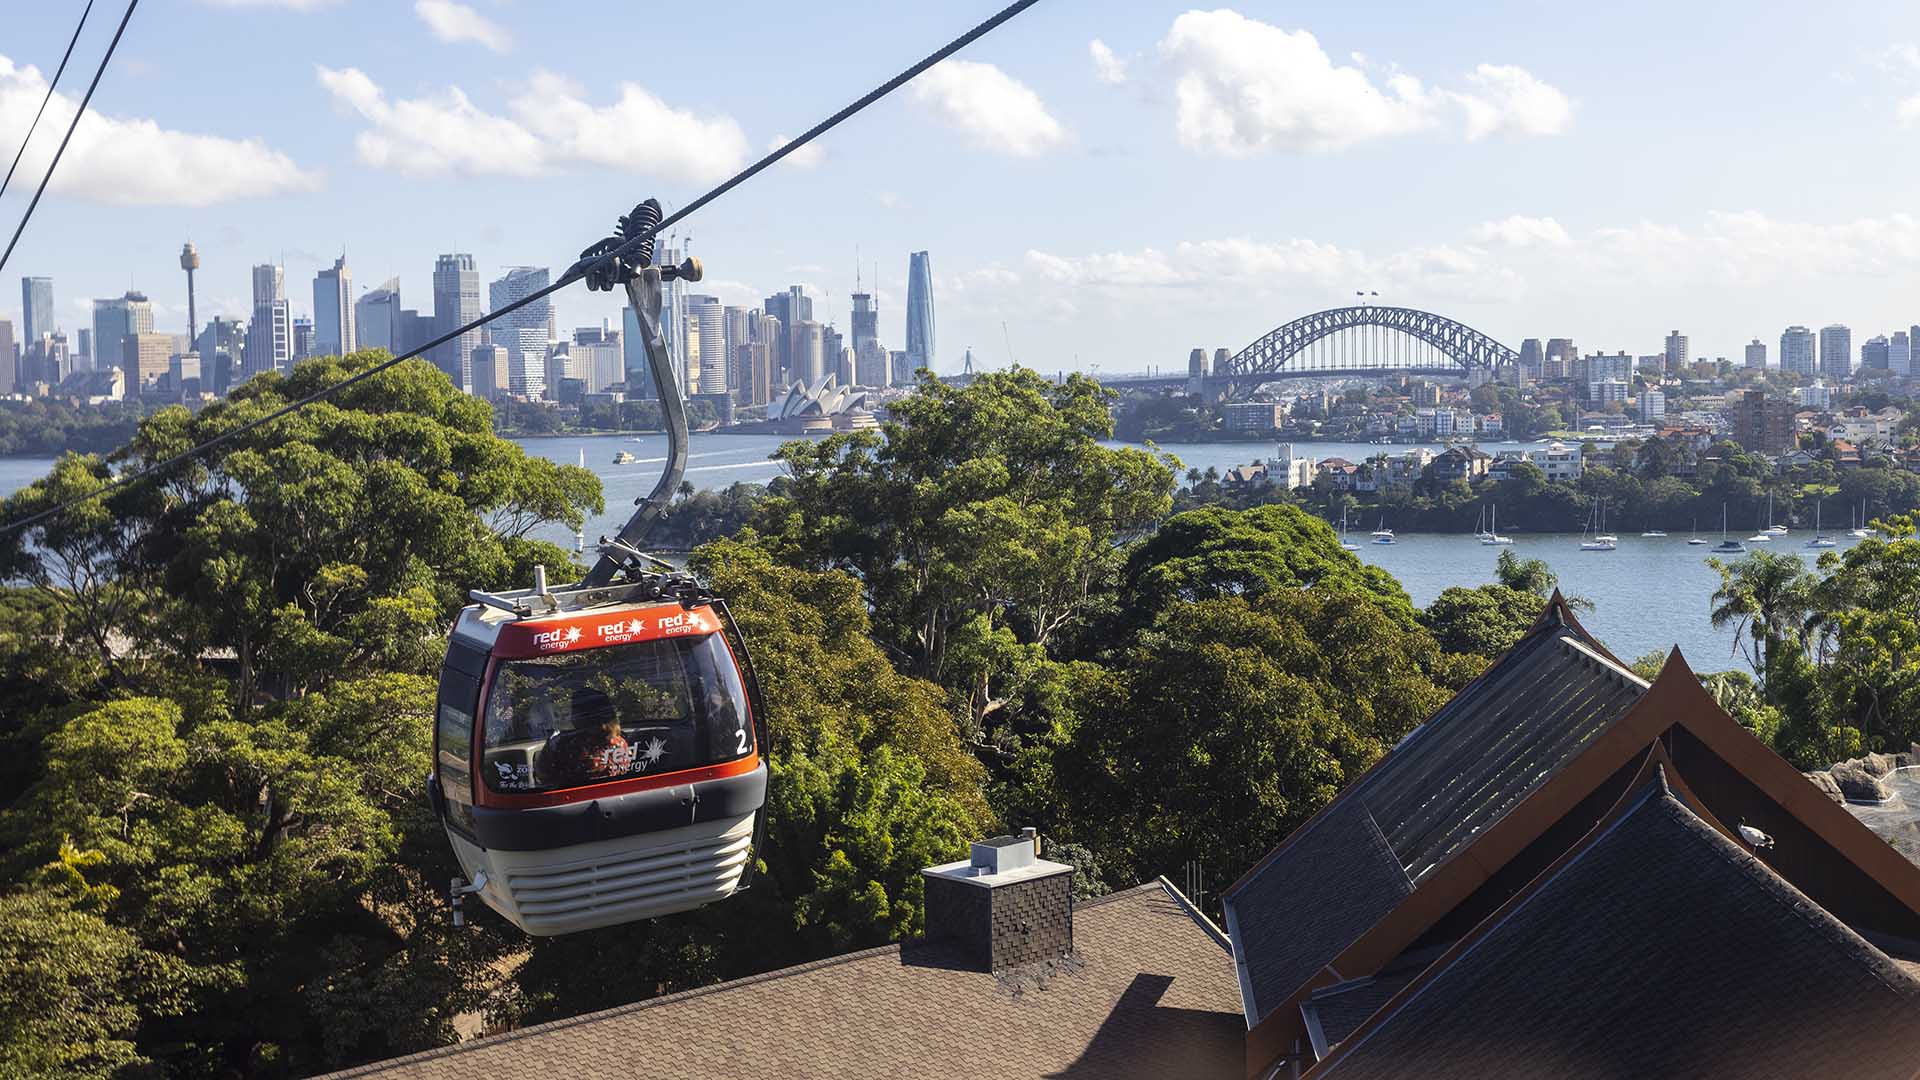 Taronga Zoo's Sky Safari Cable Car Is Retiring After 35 Years, Then Getting a Huge Upgrade